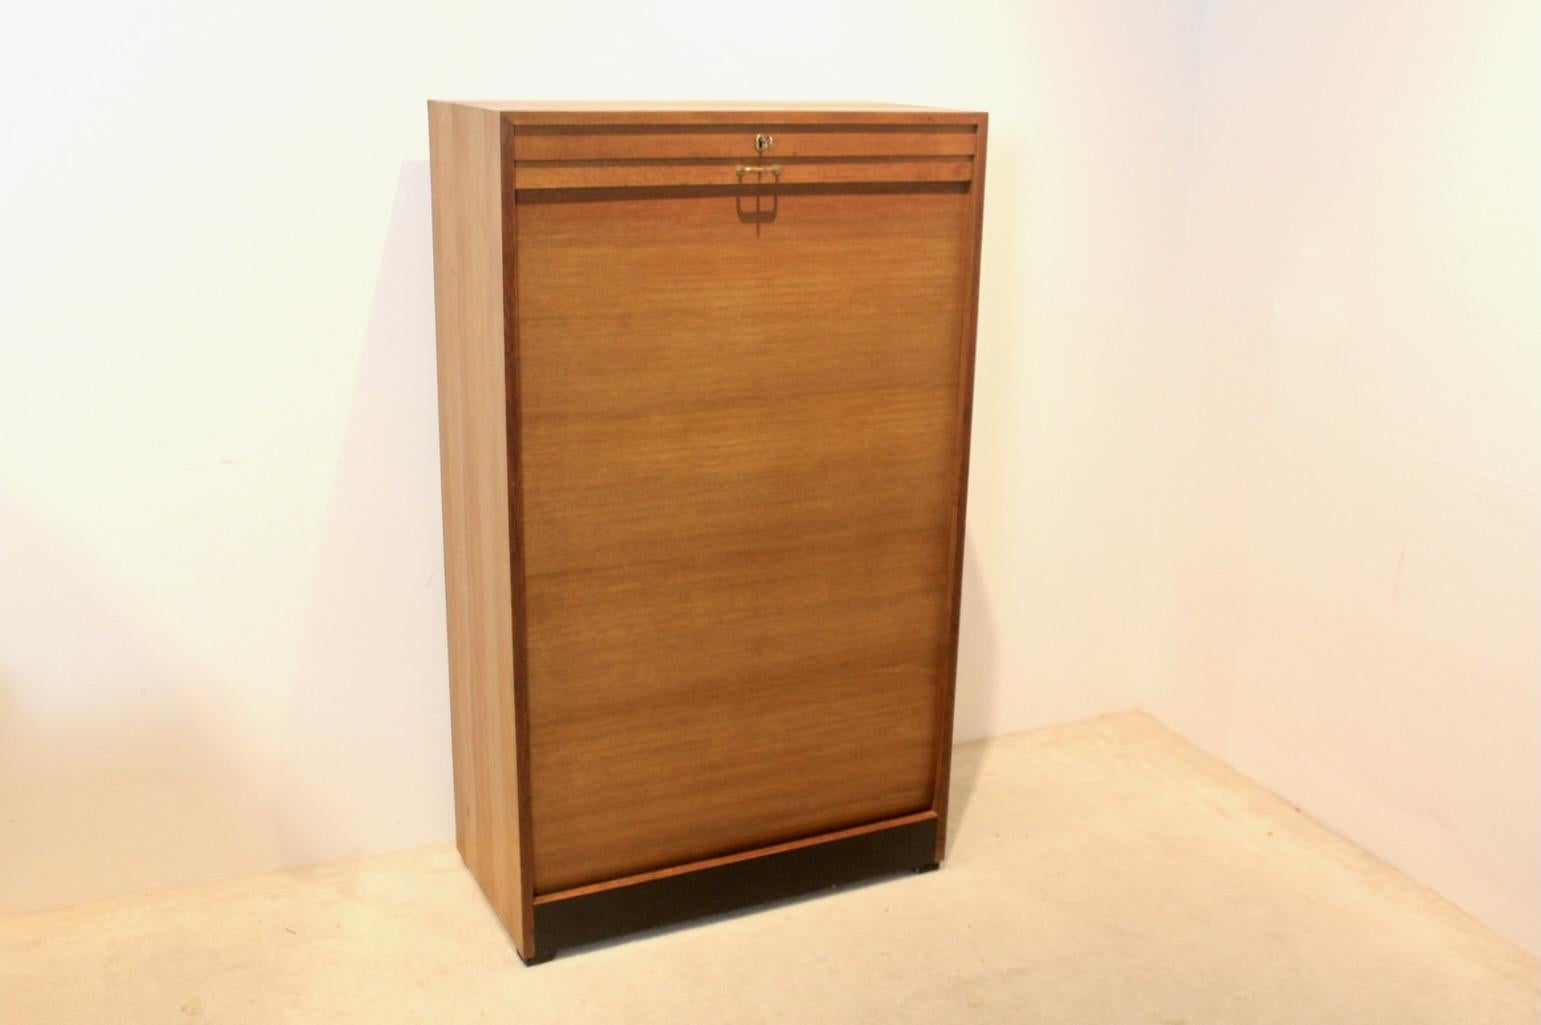 Smart Dutch Library Cabinet form the ‘60s in oak veneer with a sophisticated sliding door. Featuring 18 upper pigeonholes above a shelved cupboard below. Working lock with key. Remaining from an old office library in good condition, very practical